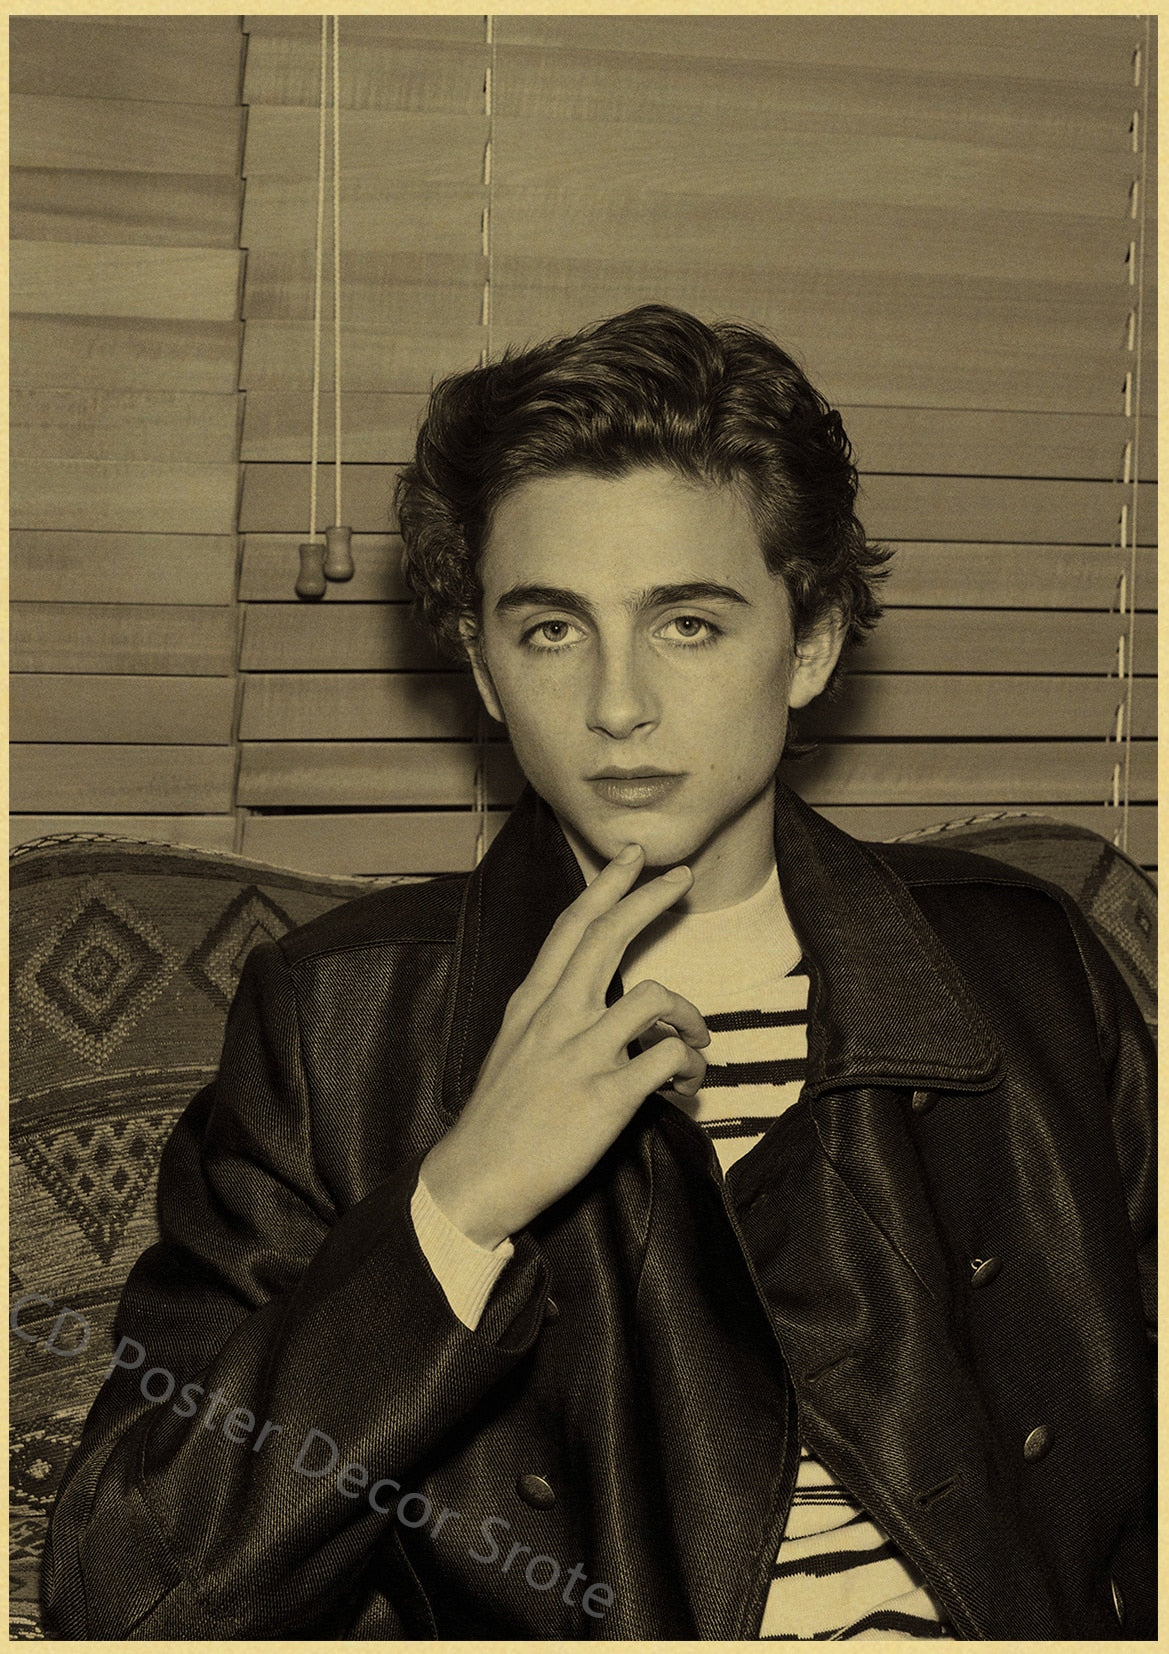 Timothee Chalamet Retro Poster Kraft Paper Prints and Posters Home Room Bar Cafe Movie Theater Decor Aesthetic Art Wall Painting